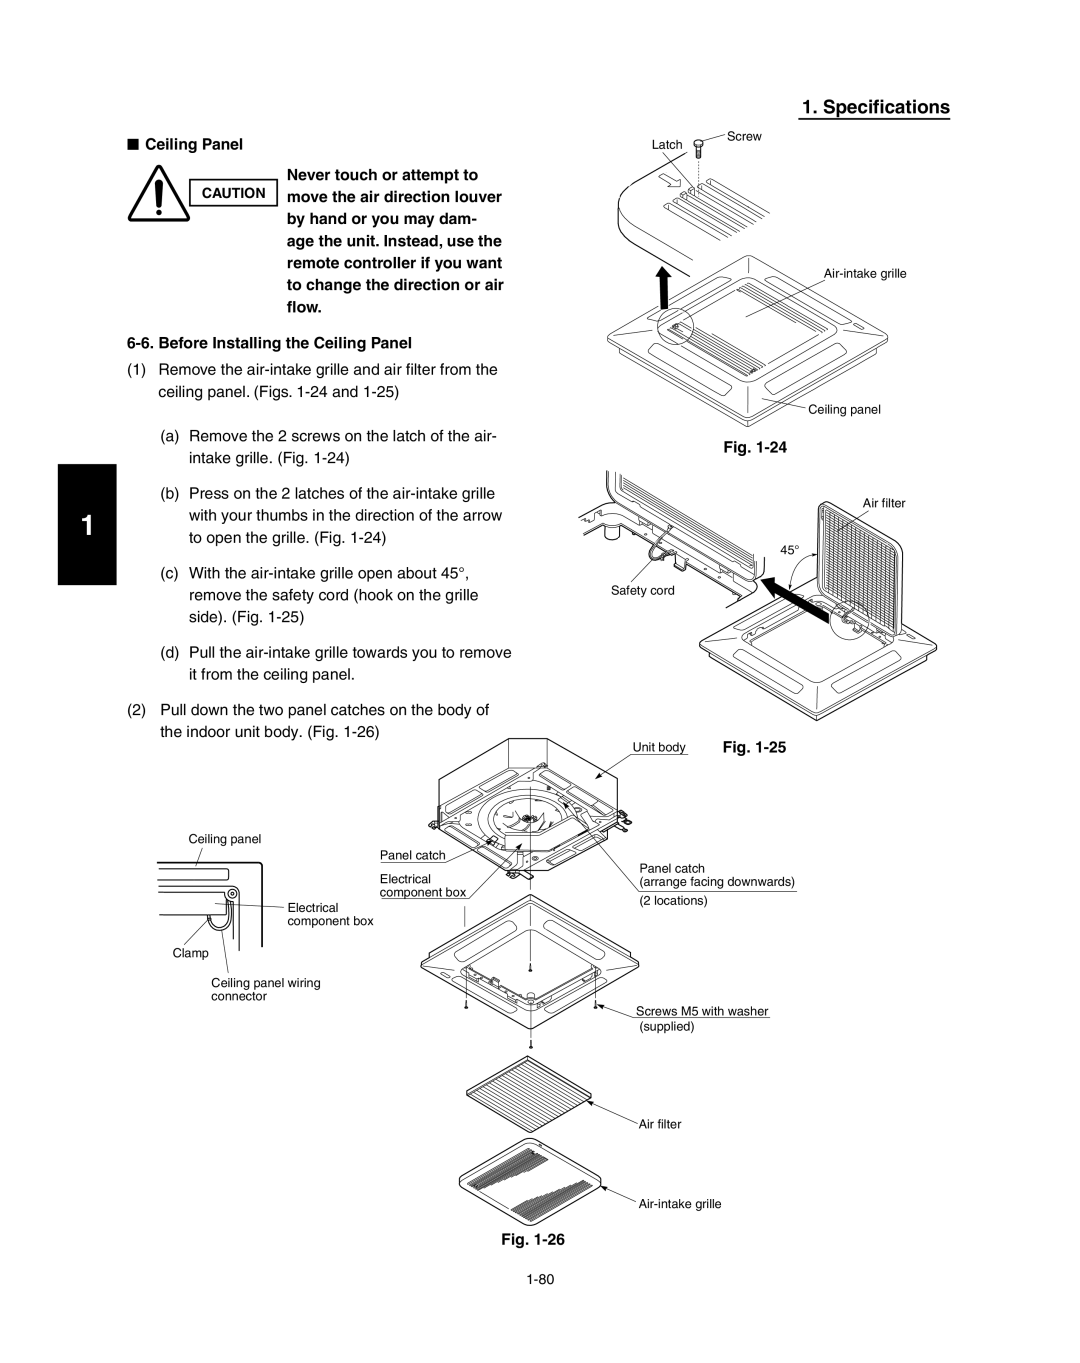 Panasonic R410A service manual Specifications, Before Installing the Ceiling Panel, Fig 